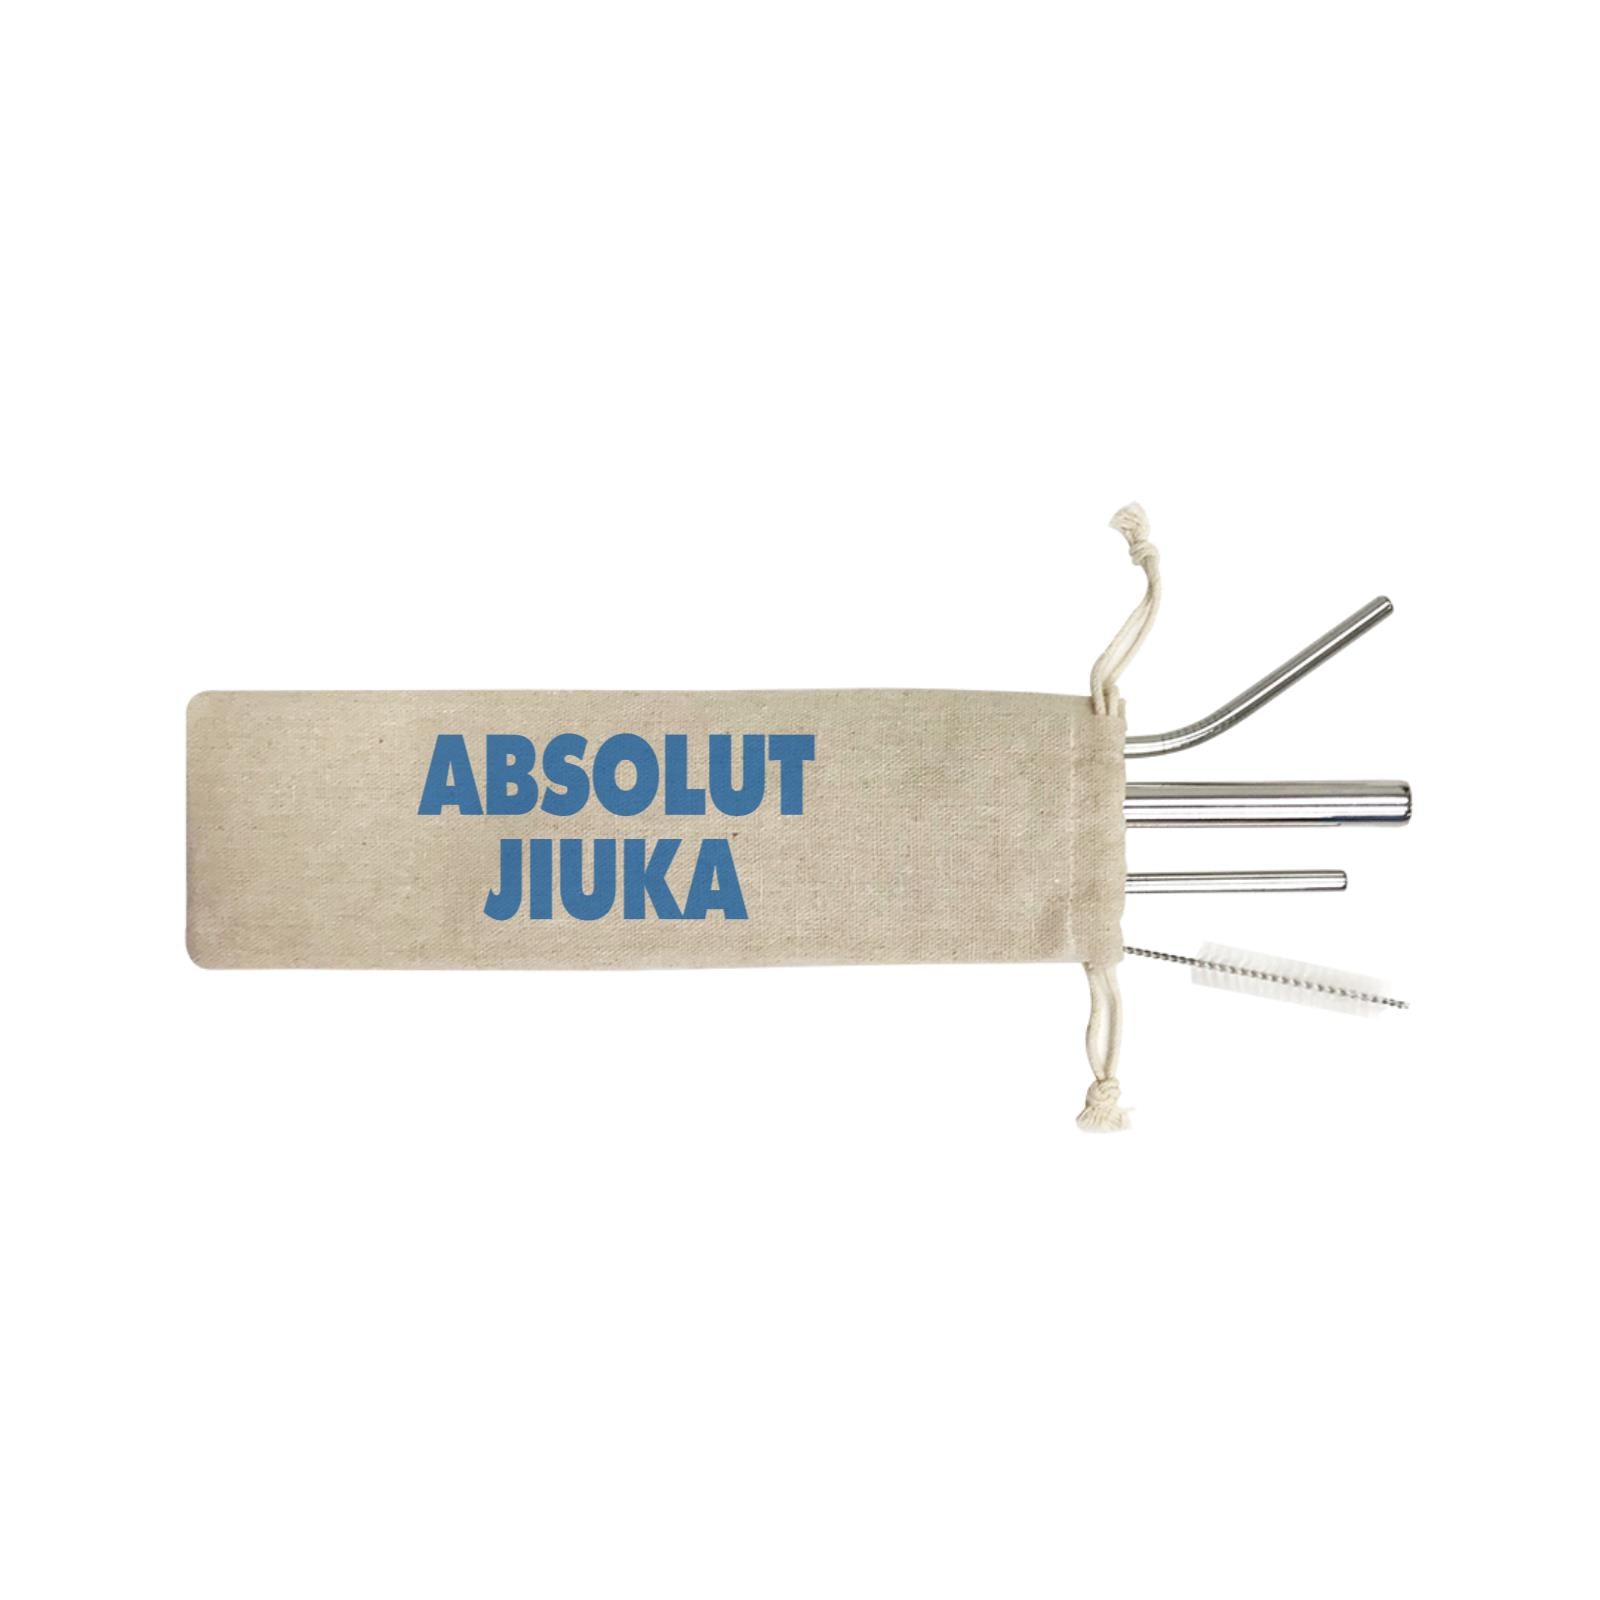 Slang Statement Absolut Jiuka 4-in-1 Stainless Steel Straw Set In a Satchel